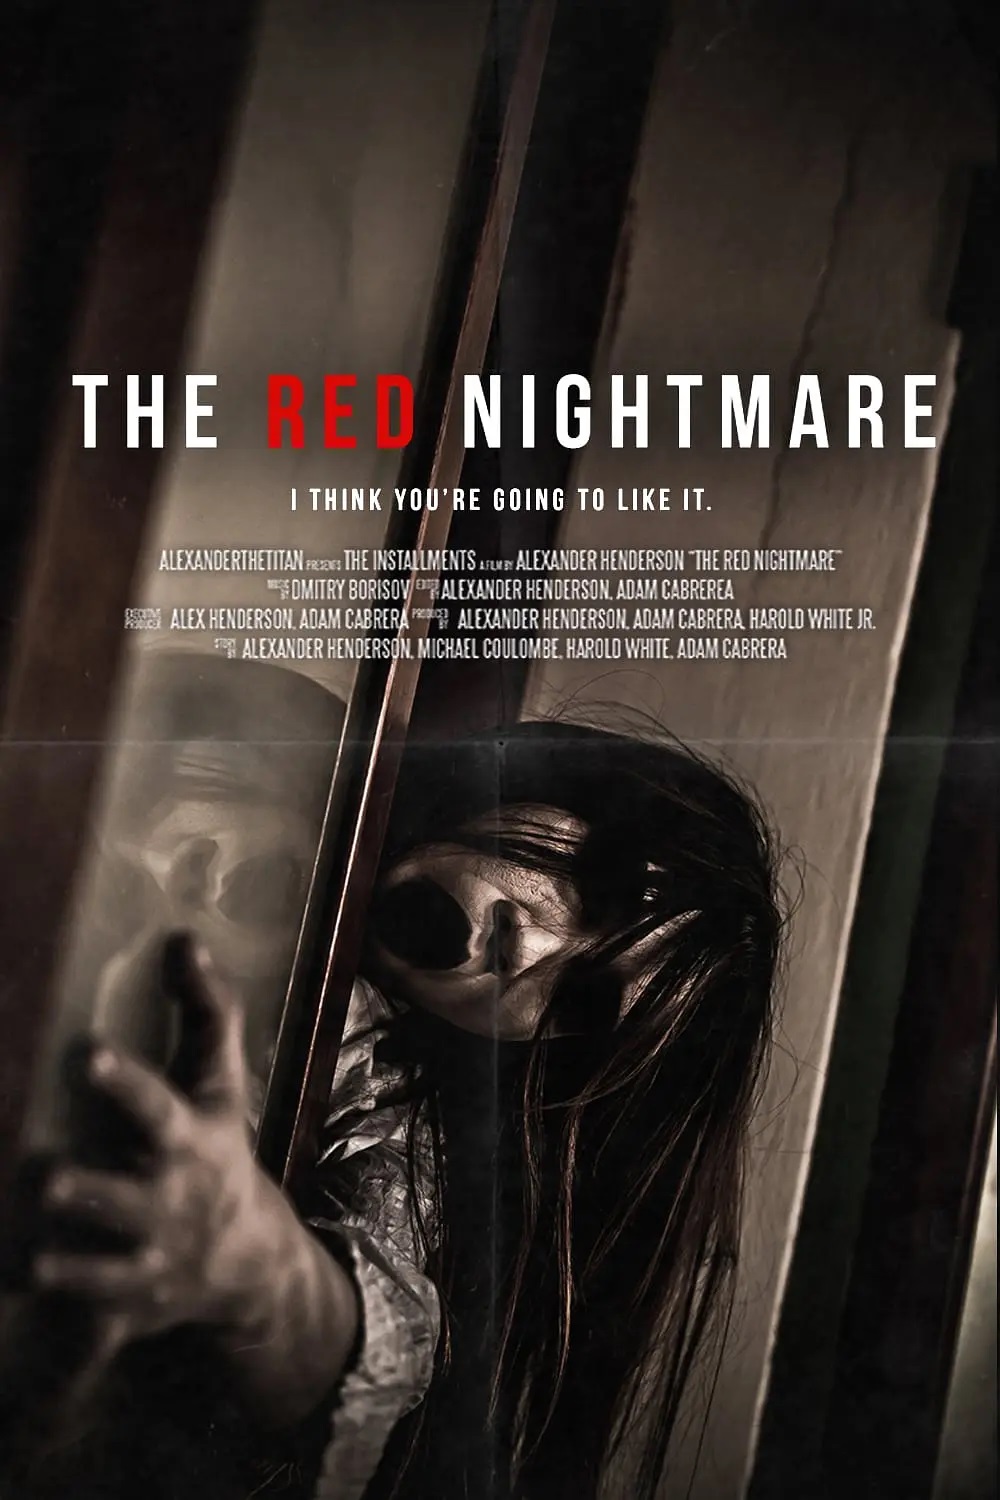   free-movies-on-youtube-The-Red-Nightmare 